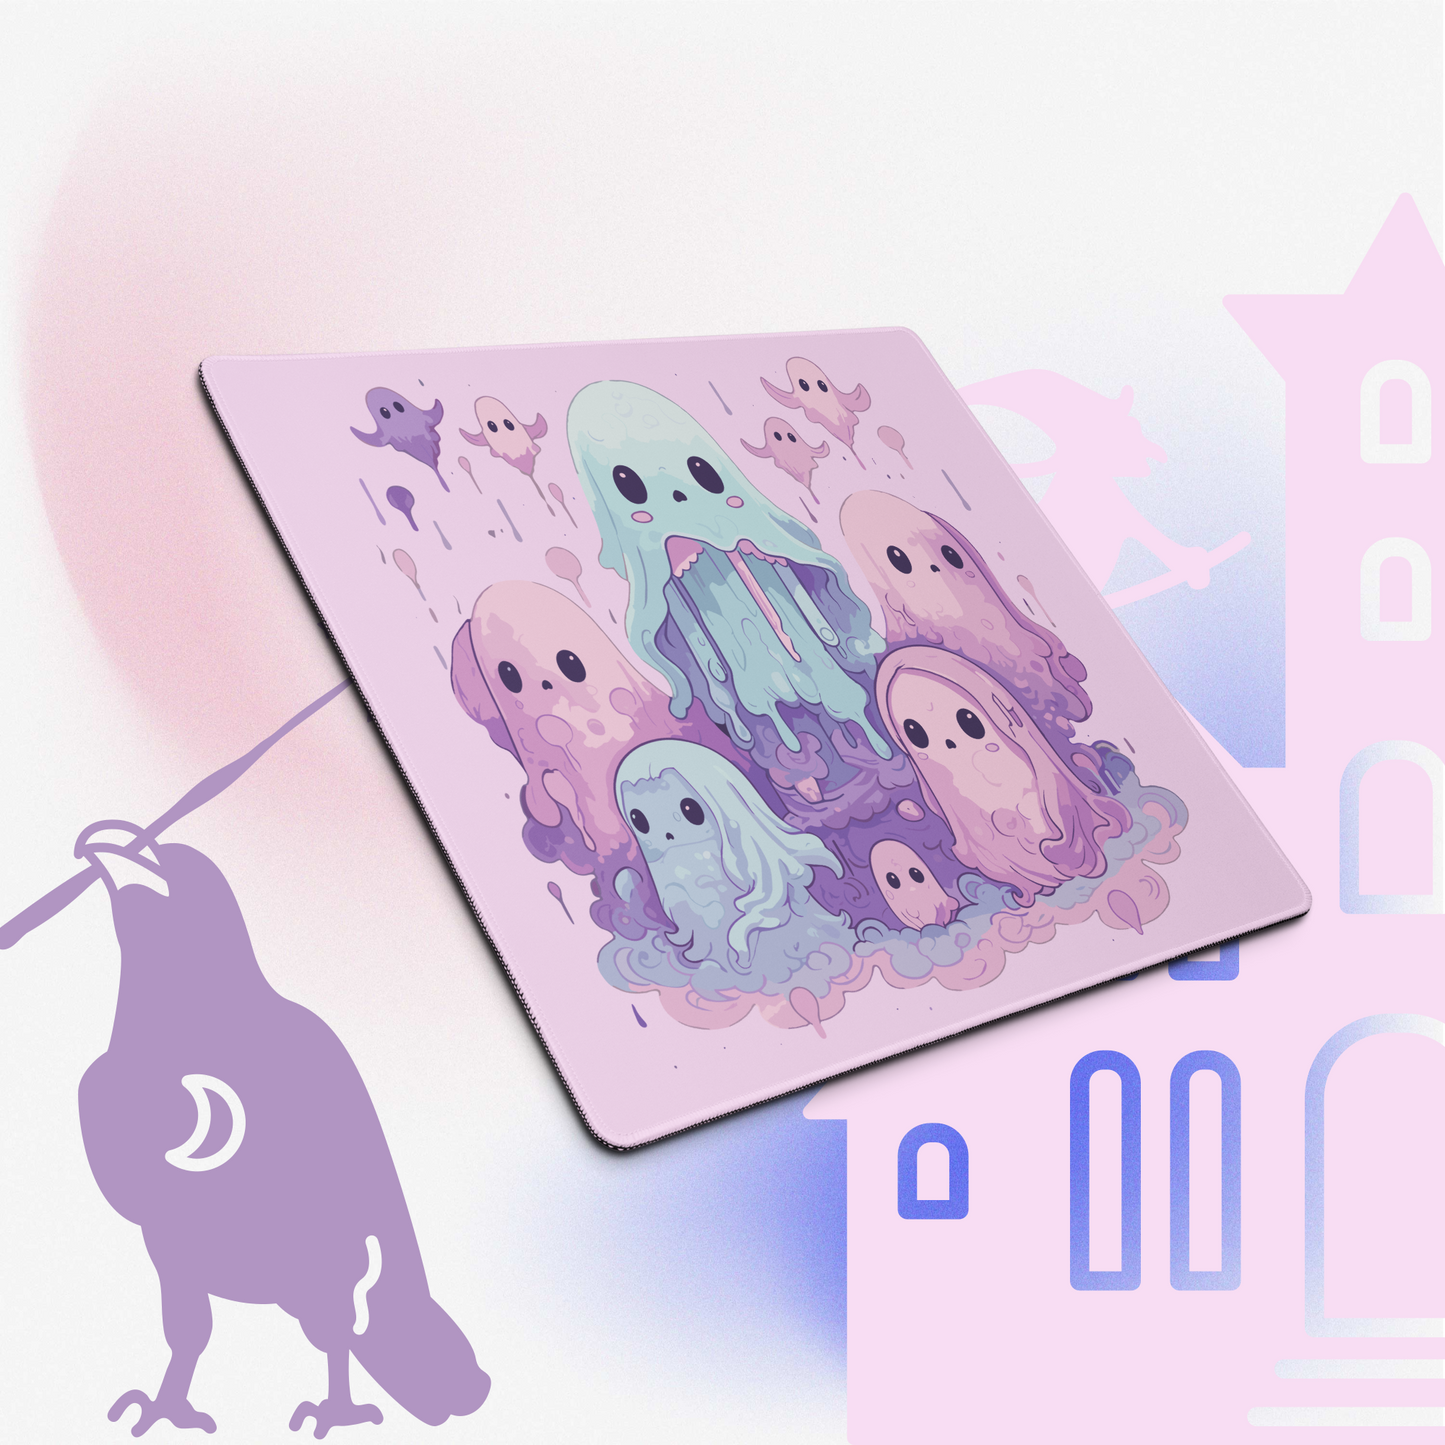 Pastel Ghost Gaming Mouse Pad, Premium-Textured Square Mousepad 18 x 16 Inch, Stitched Edge Anti-Slip Waterproof Rubber Mouse Mat, Pretty Cute Mouse Pad for Office Gaming Laptop